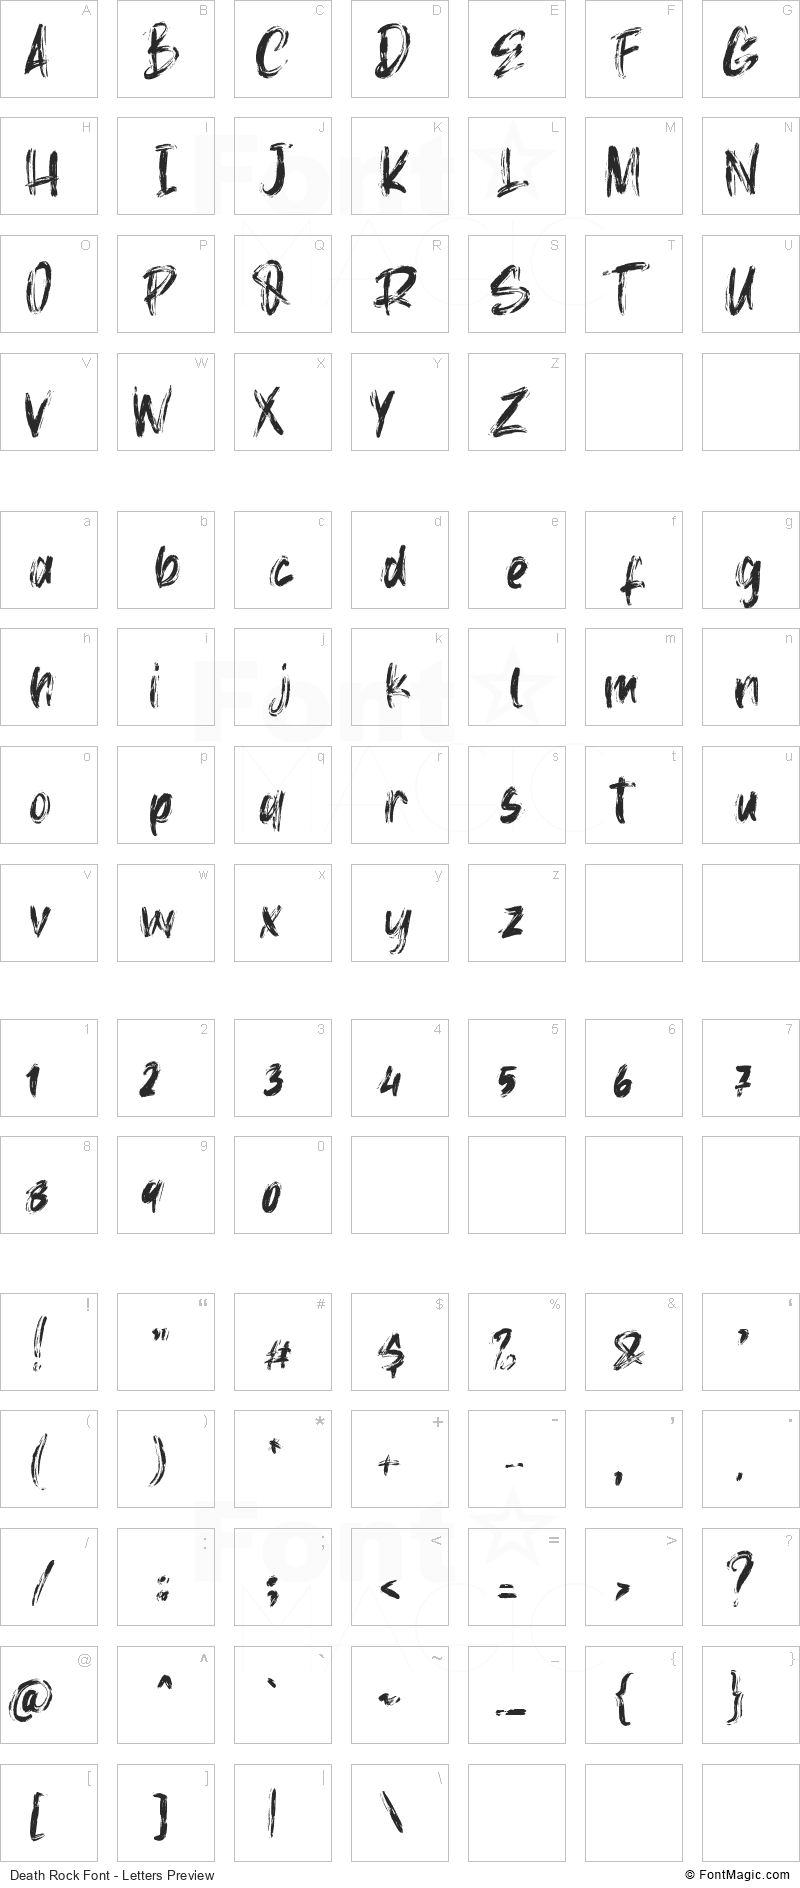 Death Rock Font - All Latters Preview Chart